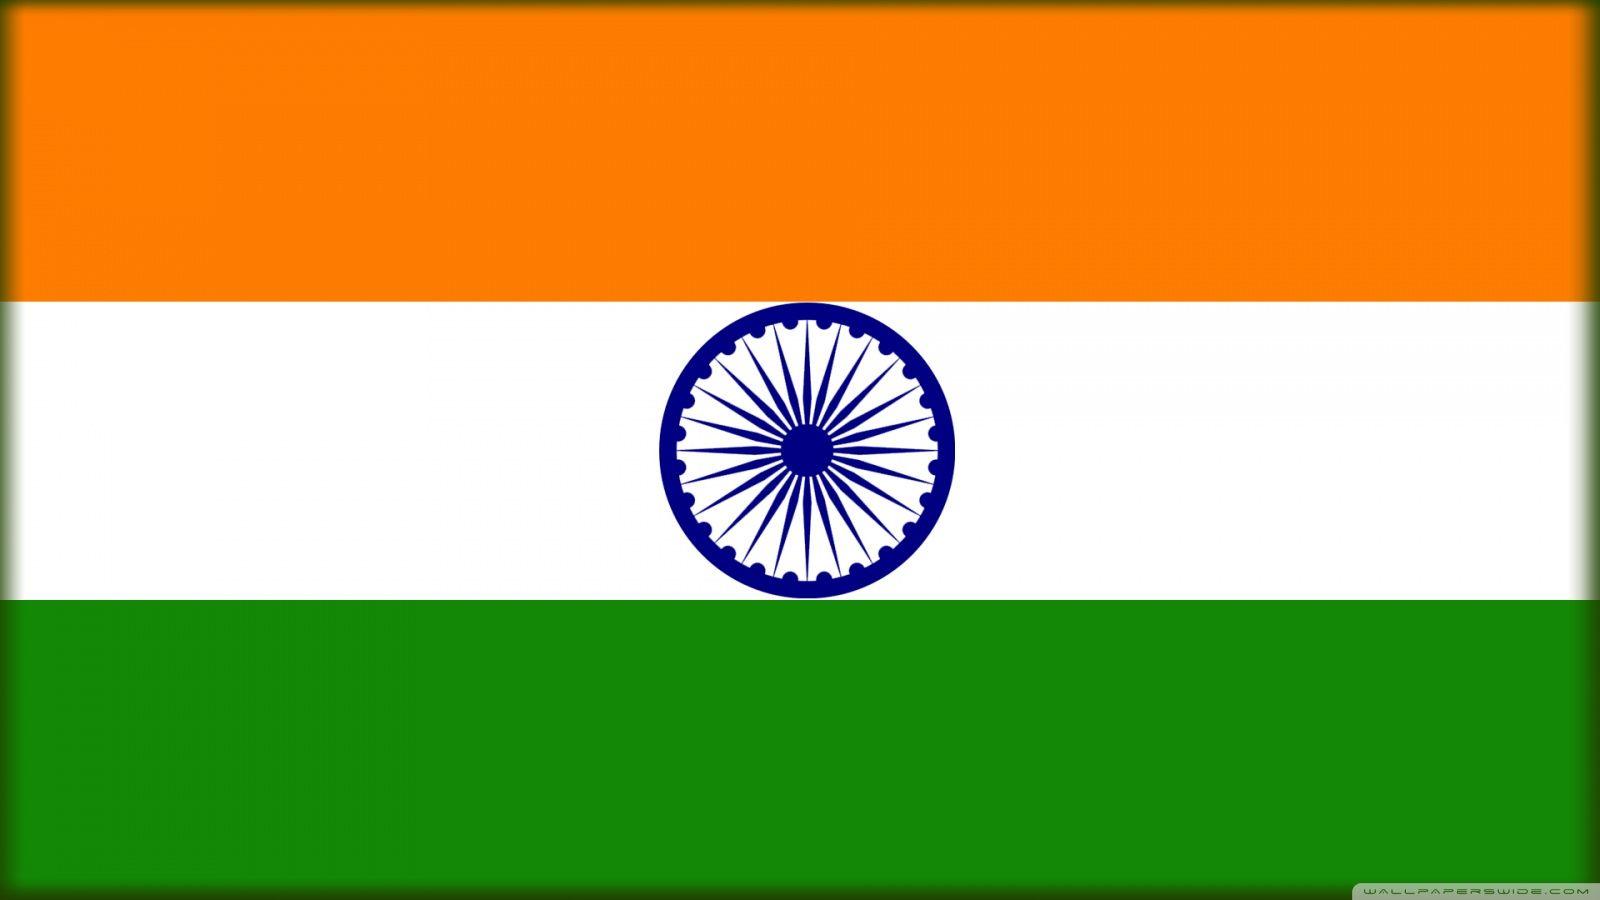 Indian National Flag Image Full Hd - Best Picture Of Flag ...